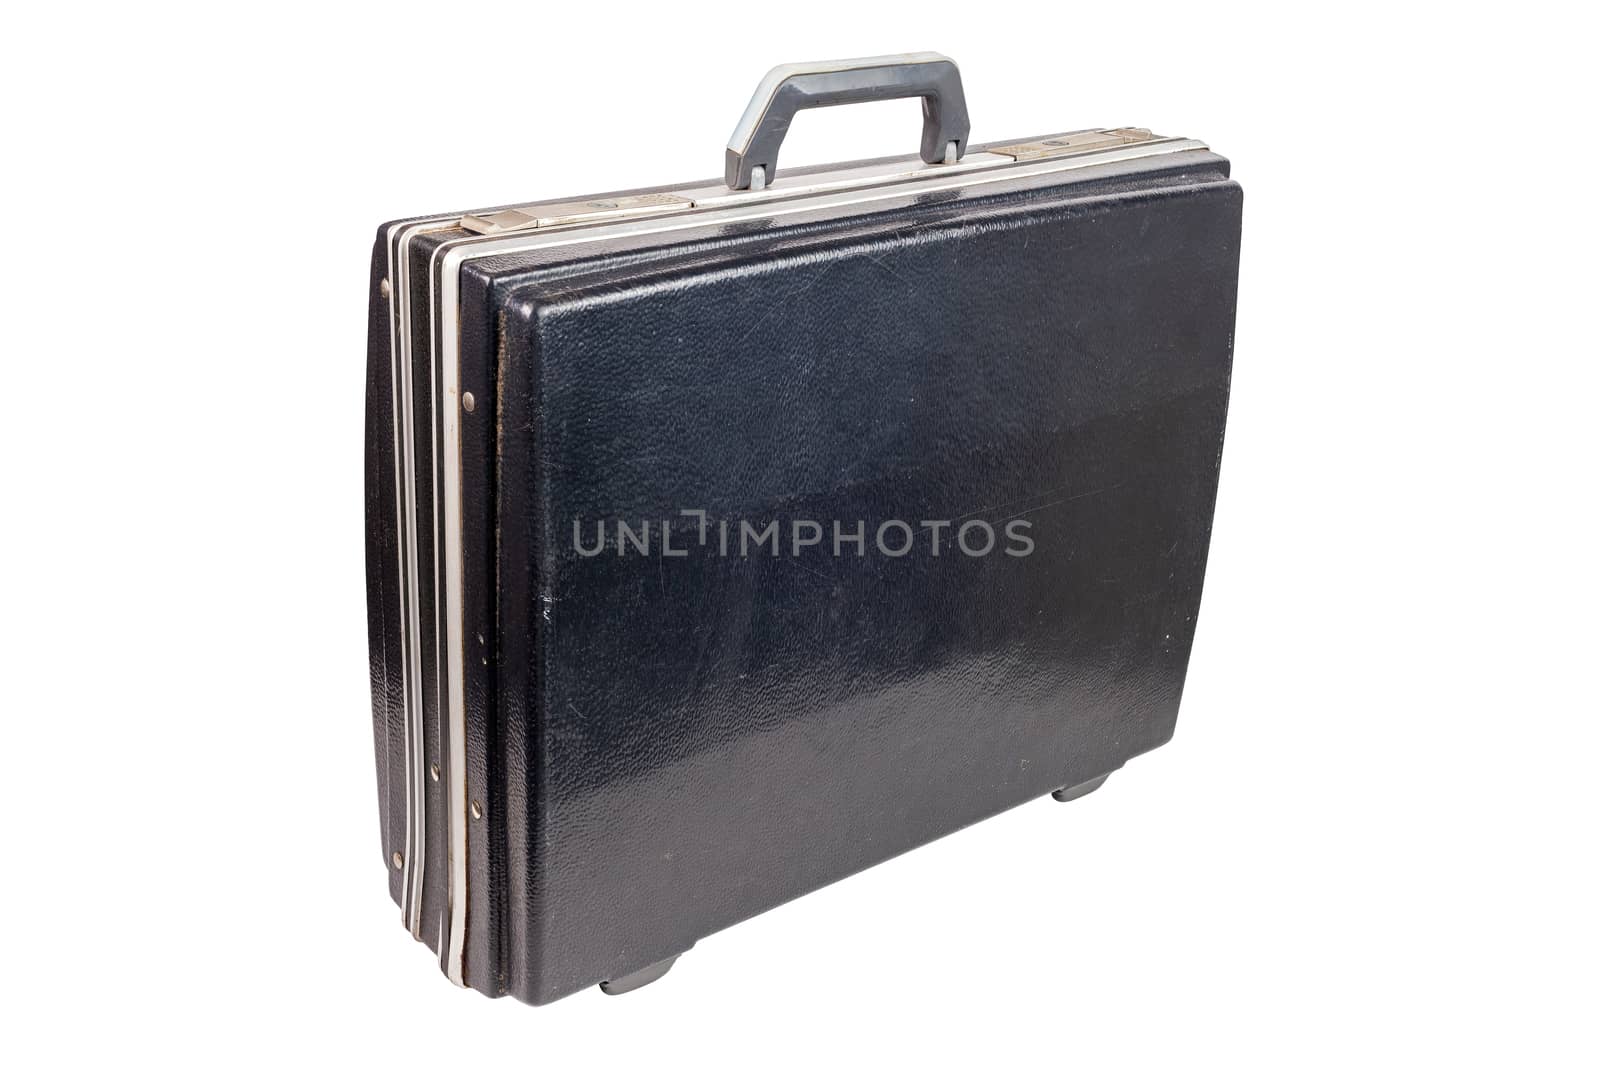 used and dirty old fashion black plastic suitcase or briefcase isolated on white background, closed and standing up by z1b